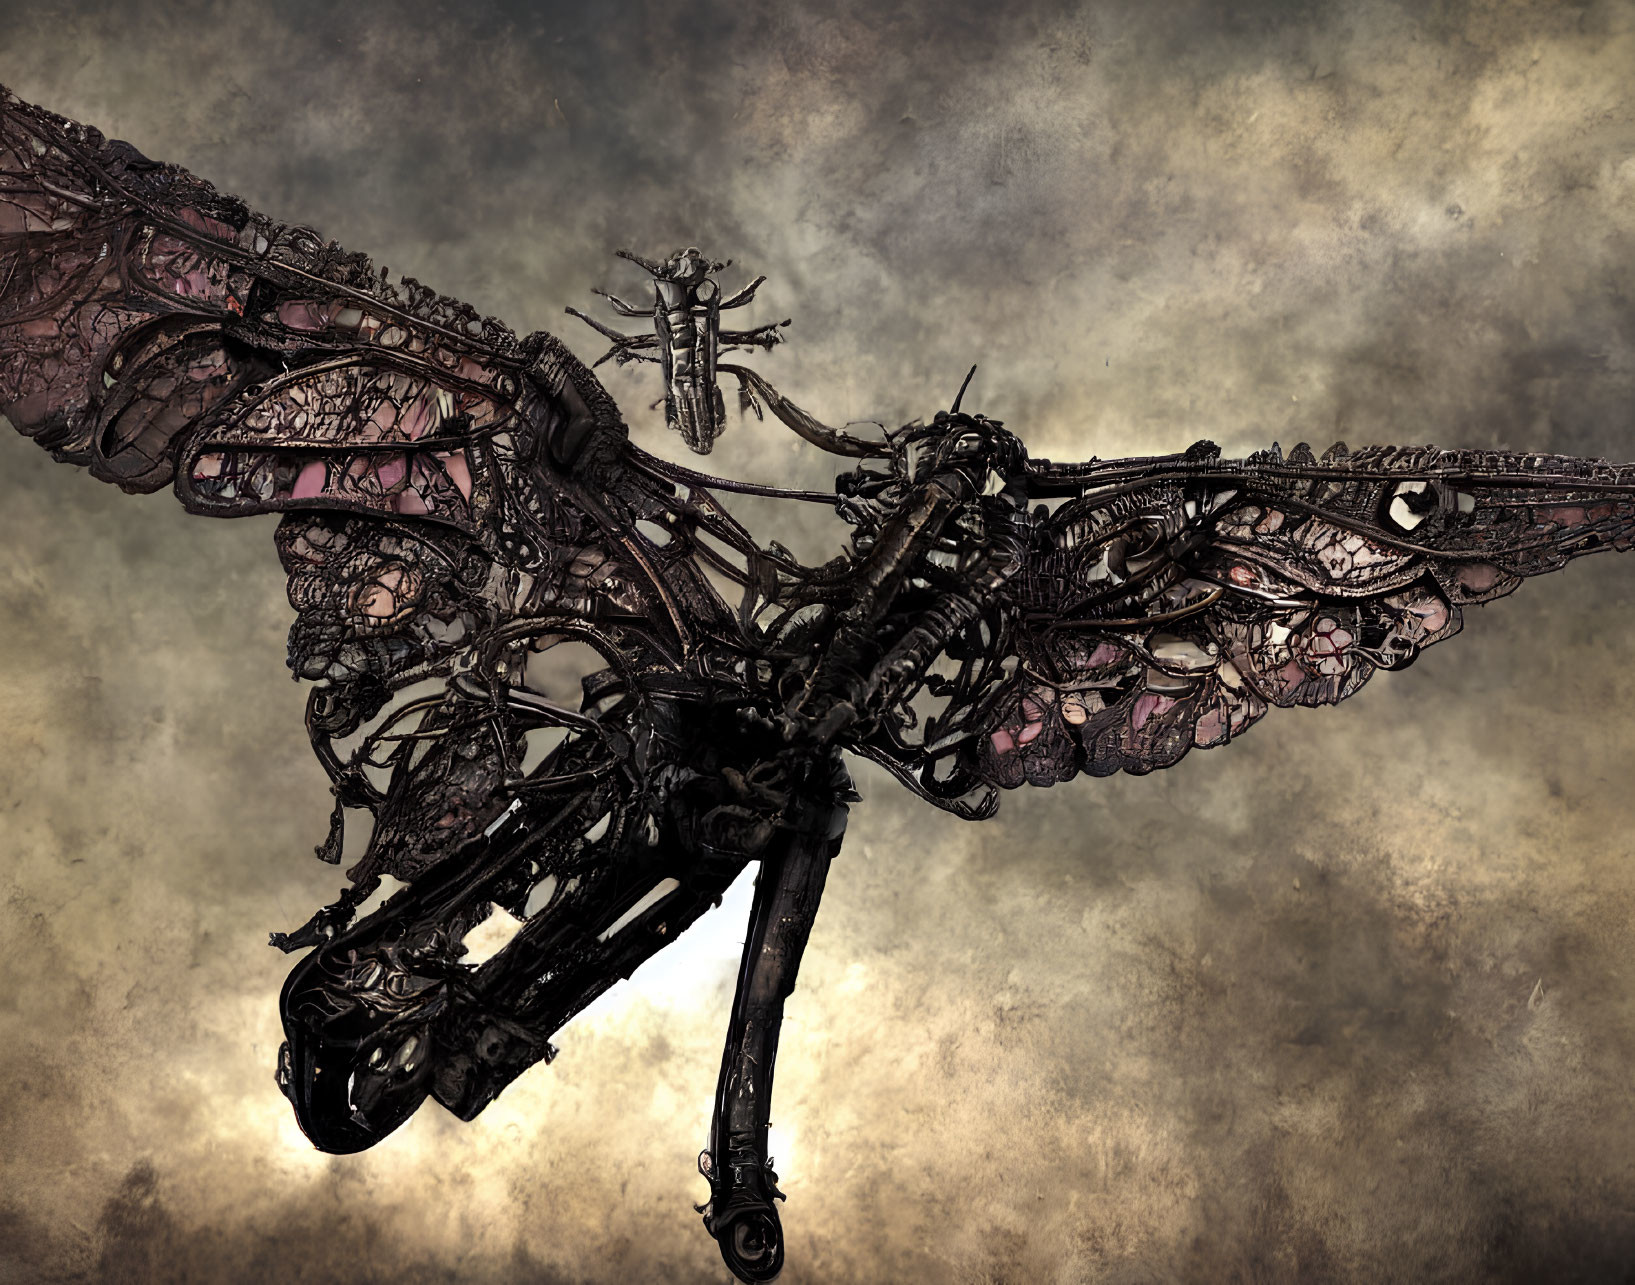 Intricately designed mechanical dragon against dramatic cloudy sky